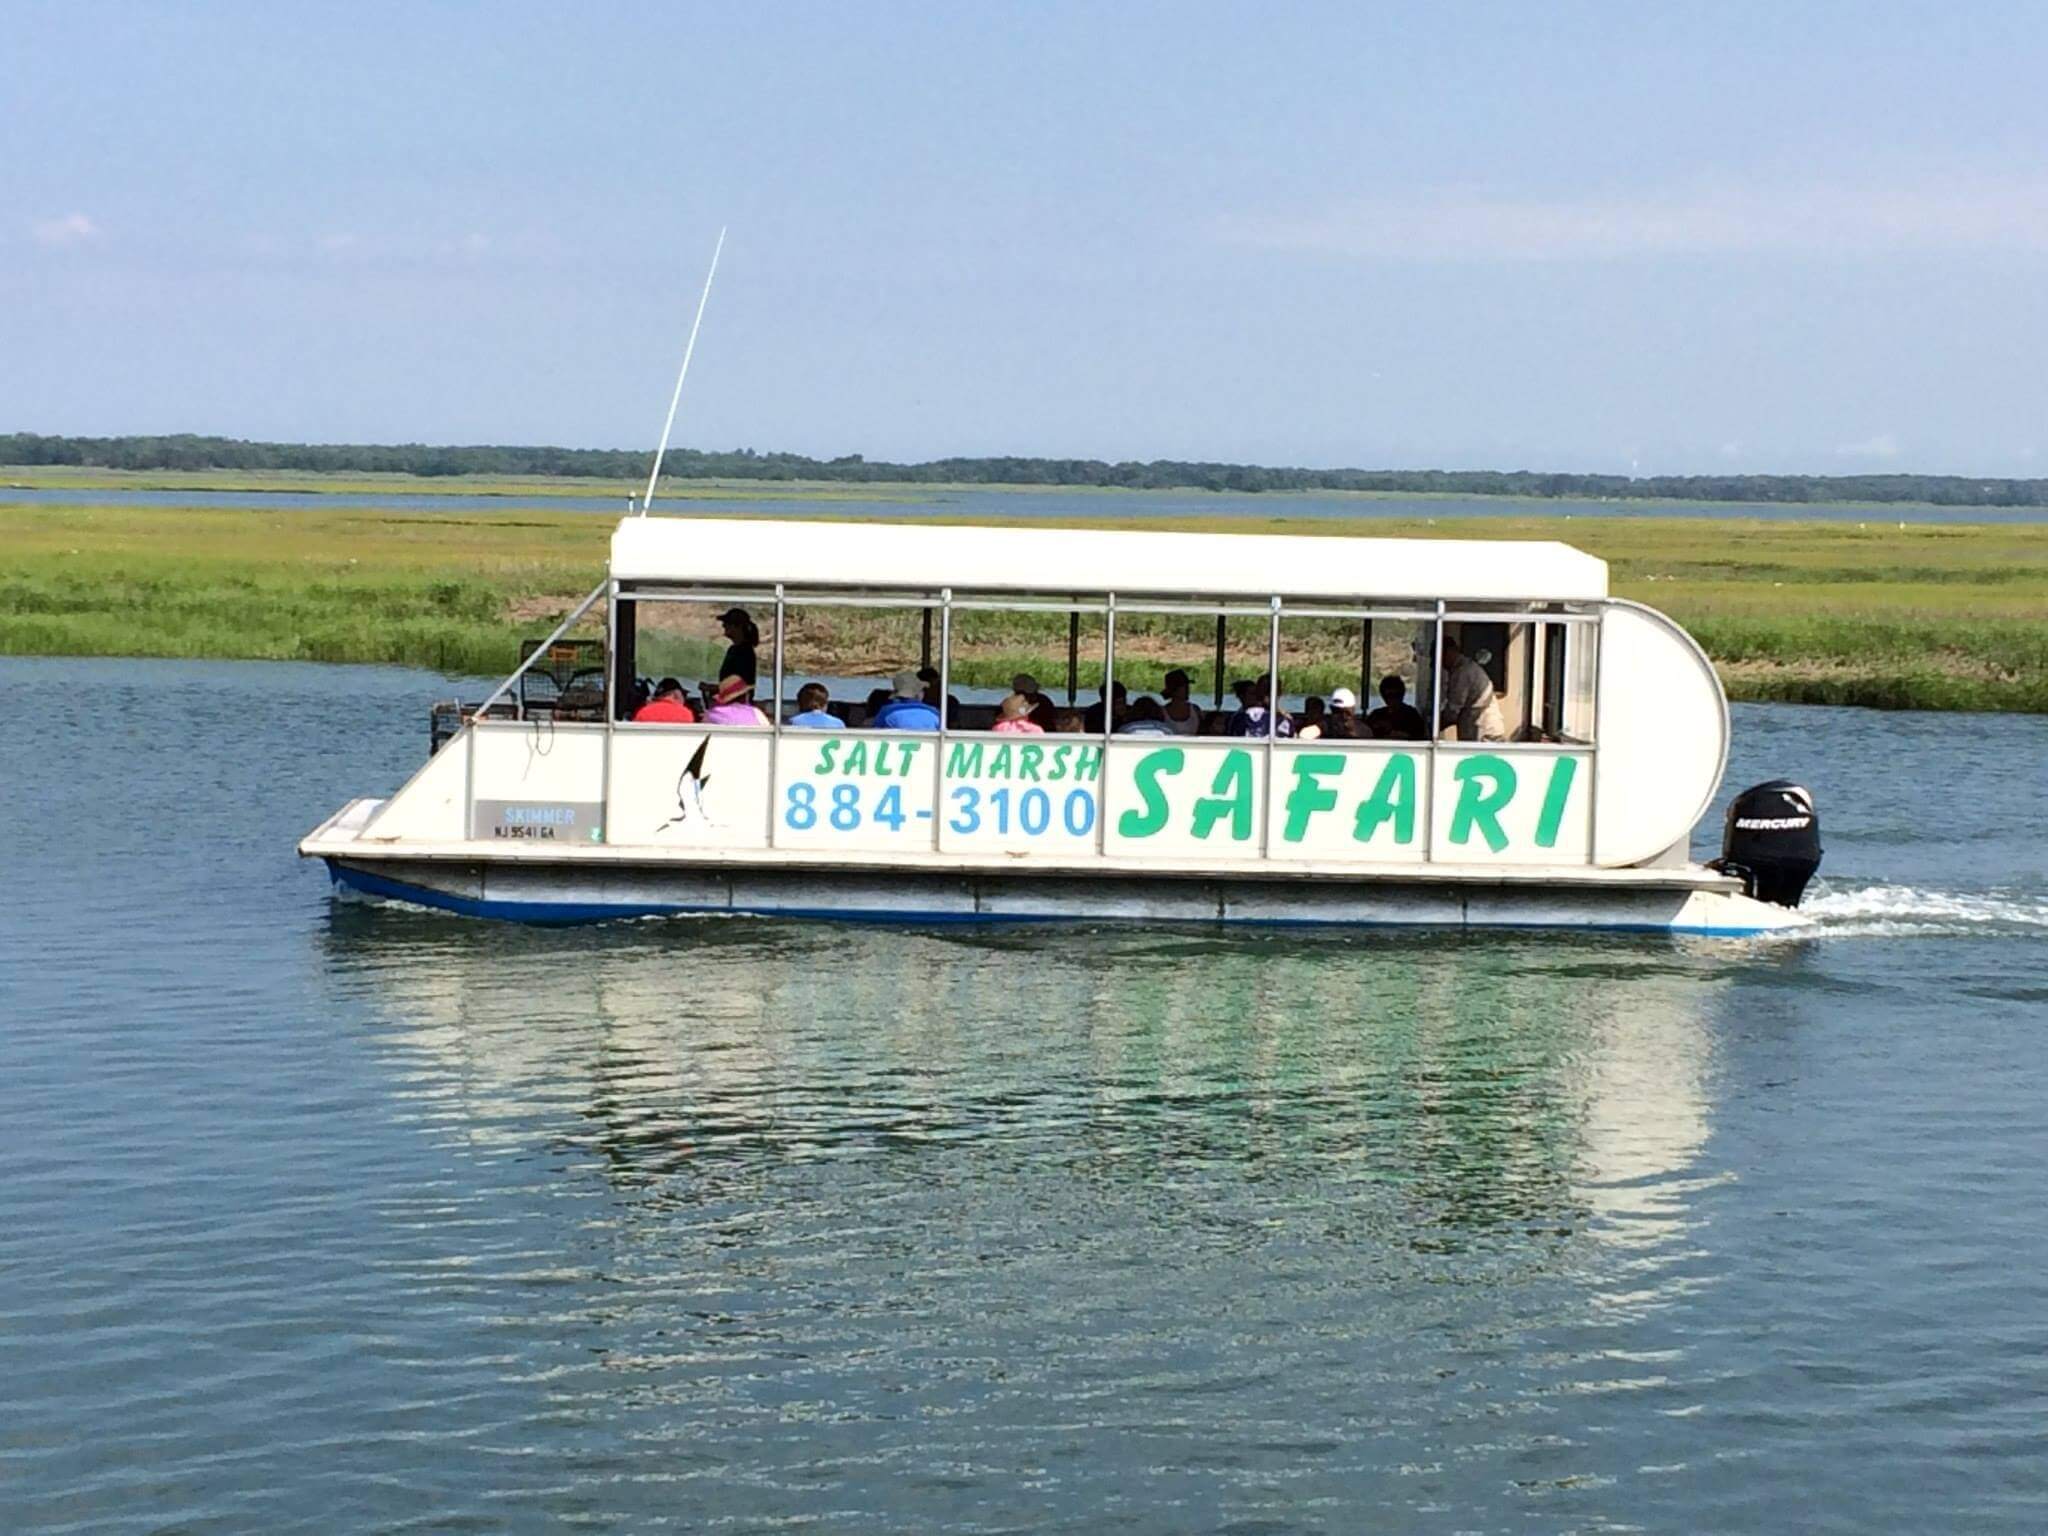 The Best Family-Friendly Boat Rides in NJ - Best of NJ: NJ Lifestyle ...